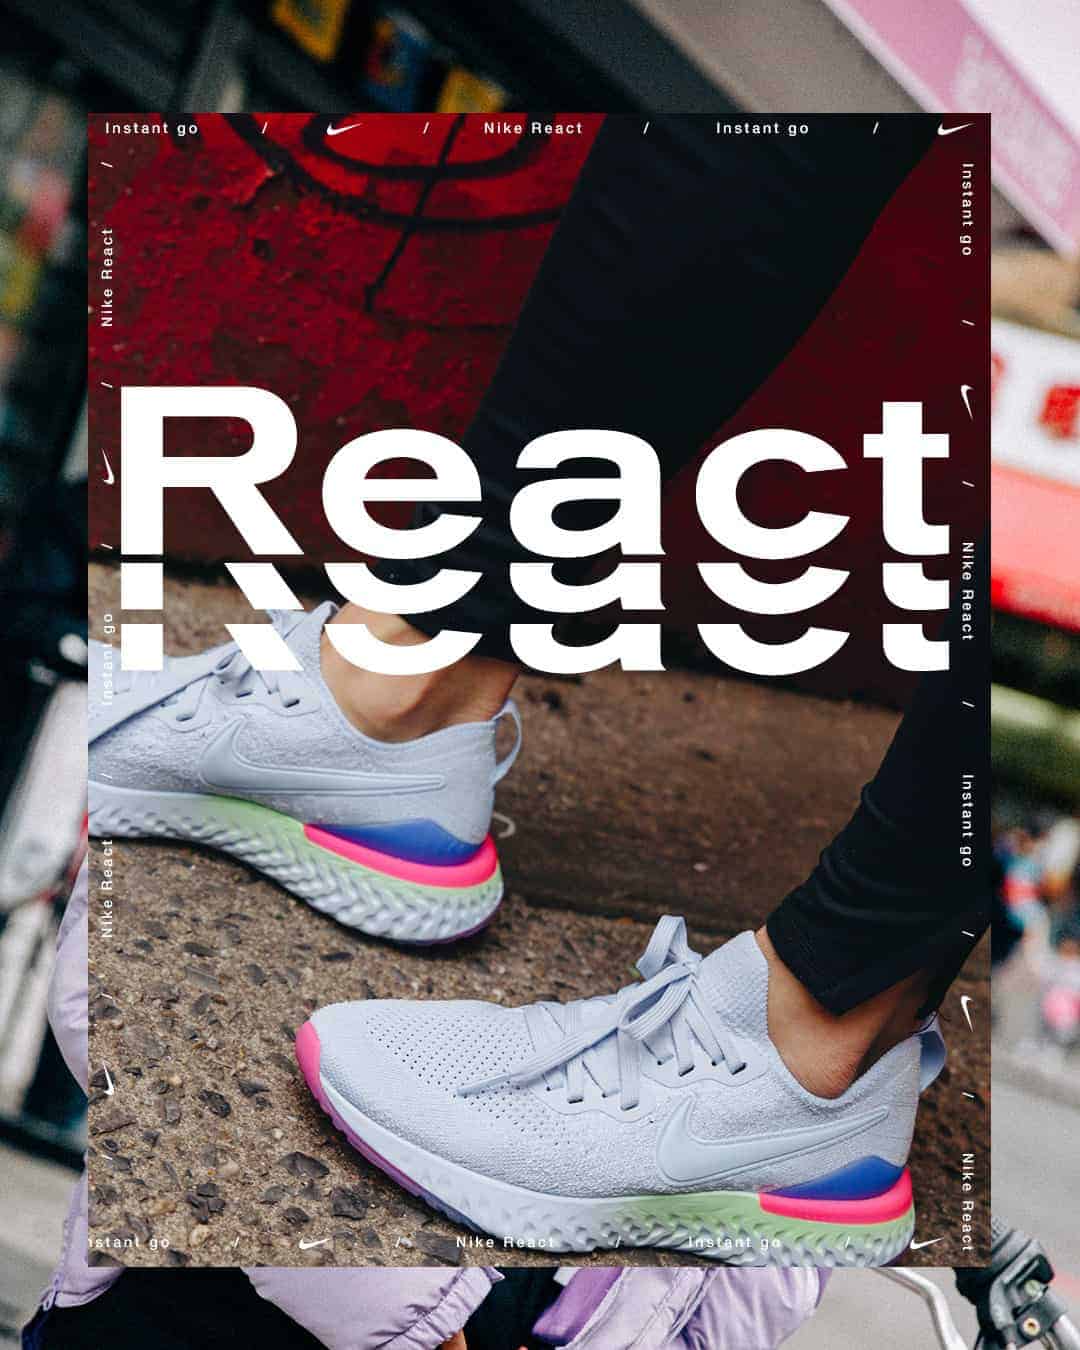 Tran La x Conscious Minds – Nike React IG Typographic Poster Campaign 0 (3)